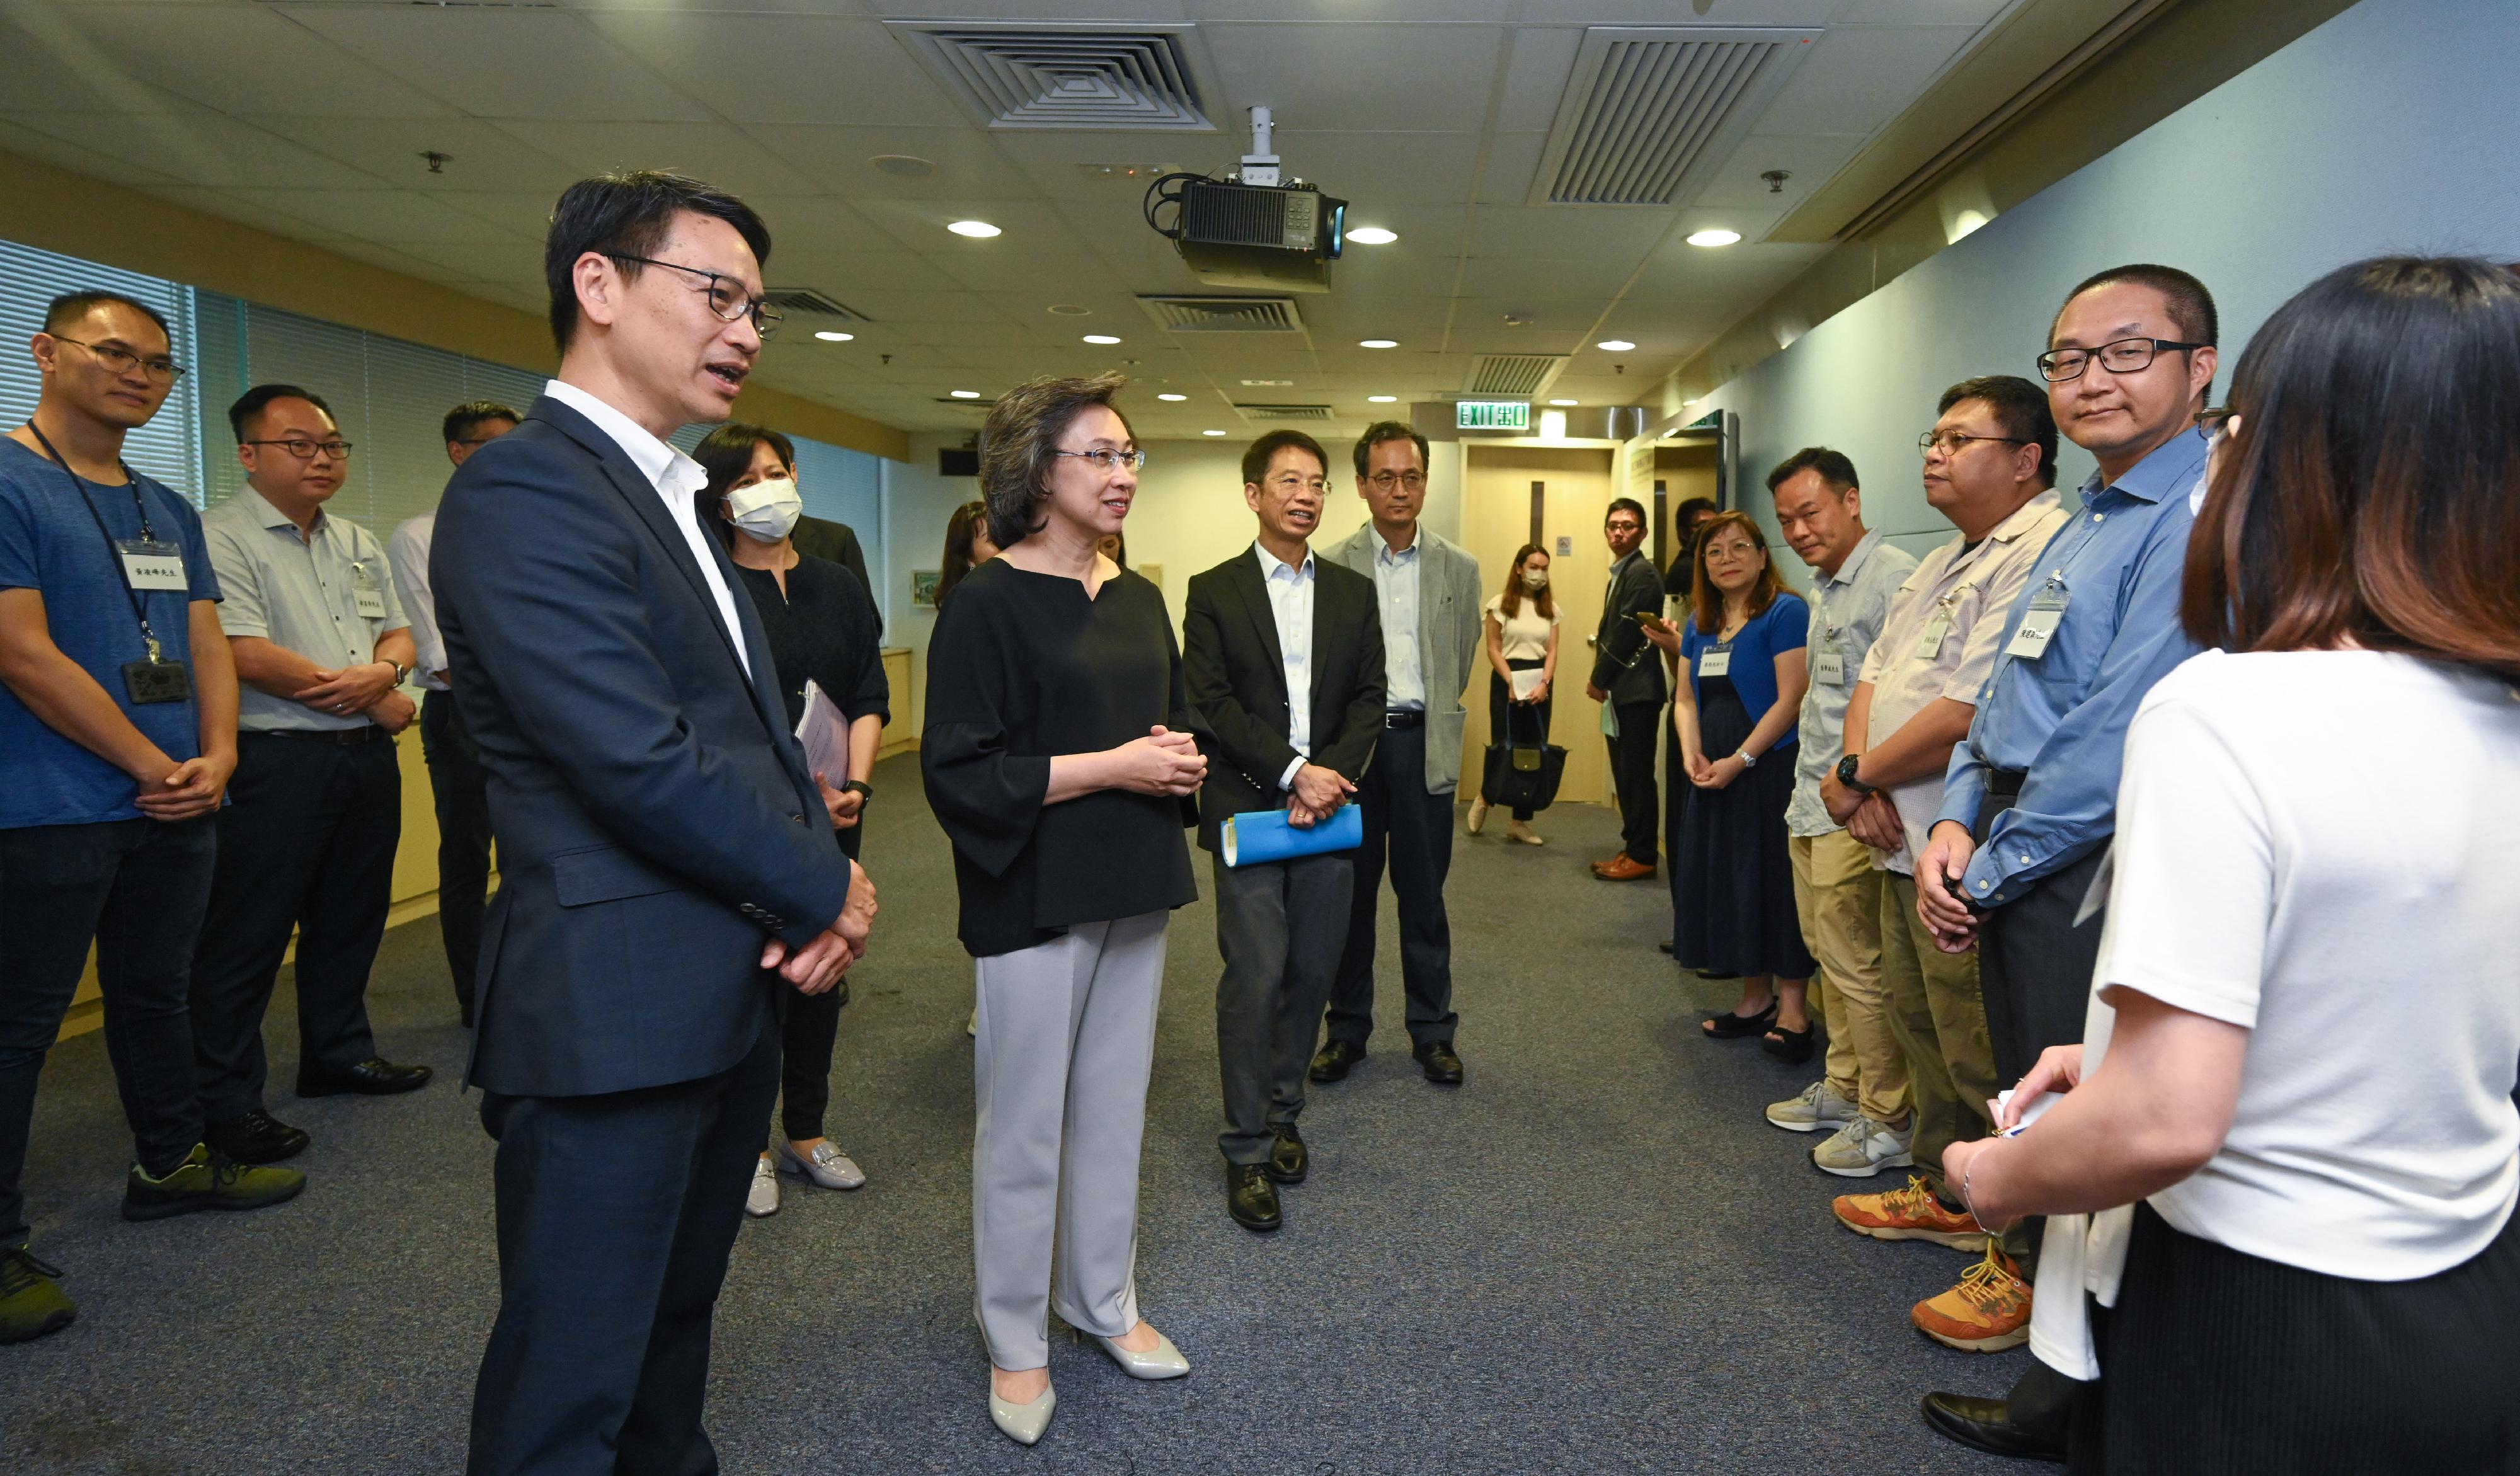 The Secretary for the Civil Service, Mrs Ingrid Yeung, visited the headquarters of the Planning Department today (September 20). Photo shows Mrs Yeung (front row, second left) meeting with staff representatives of various grades to know more about matters that concern them. Looking on are the Permanent Secretary for the Civil Service, Mr Clement Leung (front row, third left), and the Director of Planning, Mr Ivan Chung (front row, first left).